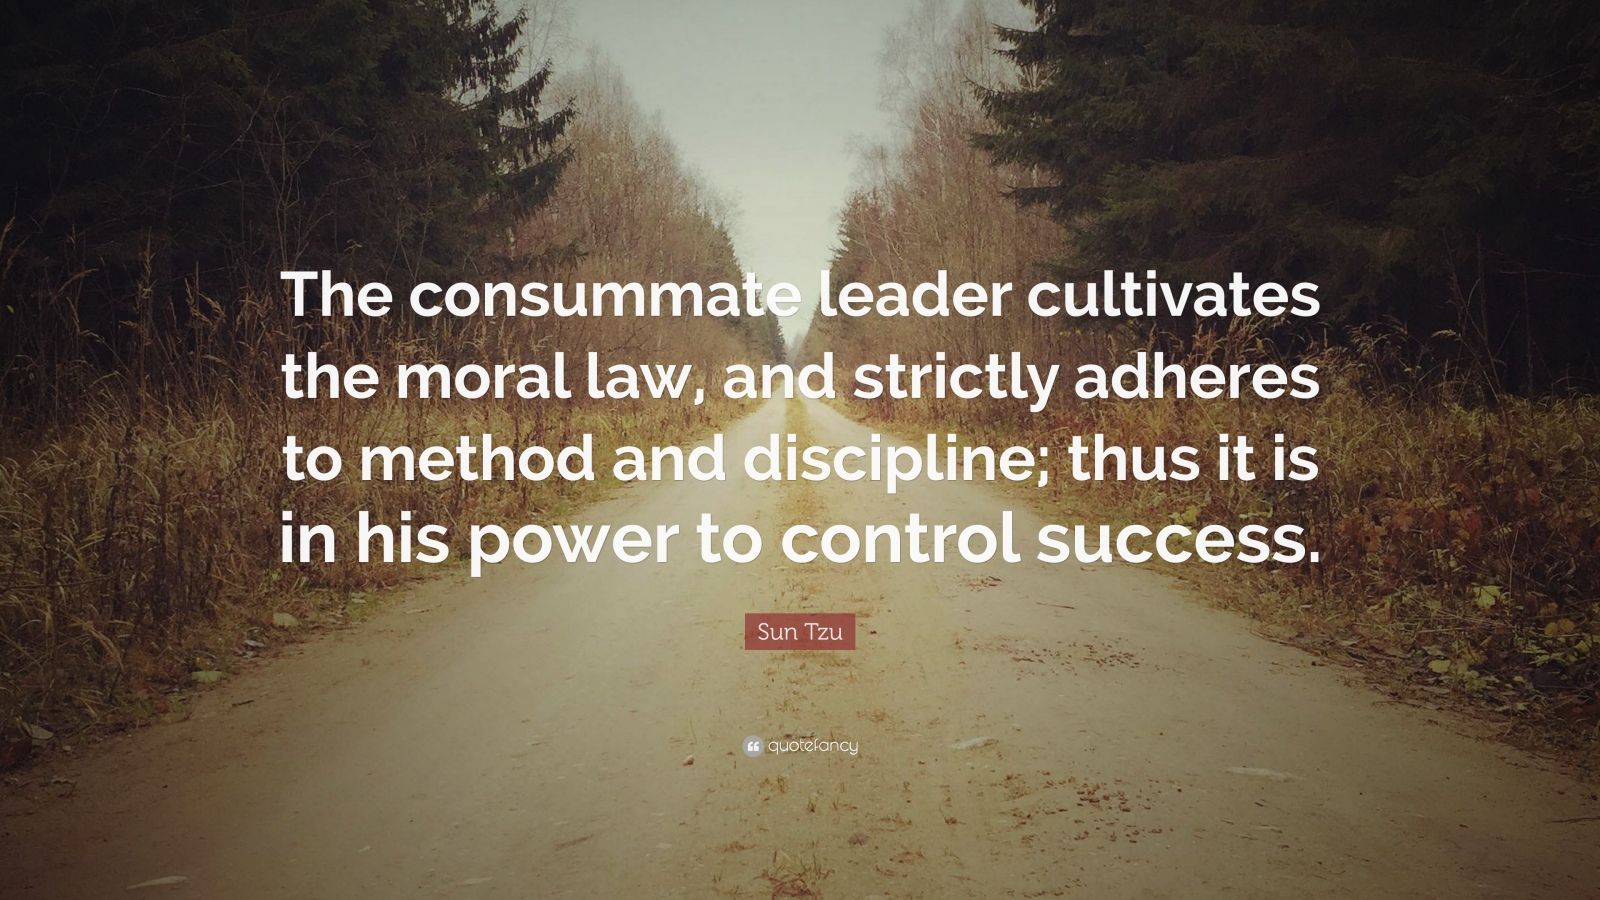 Sun Tzu Quote: “The consummate leader cultivates the moral law, and